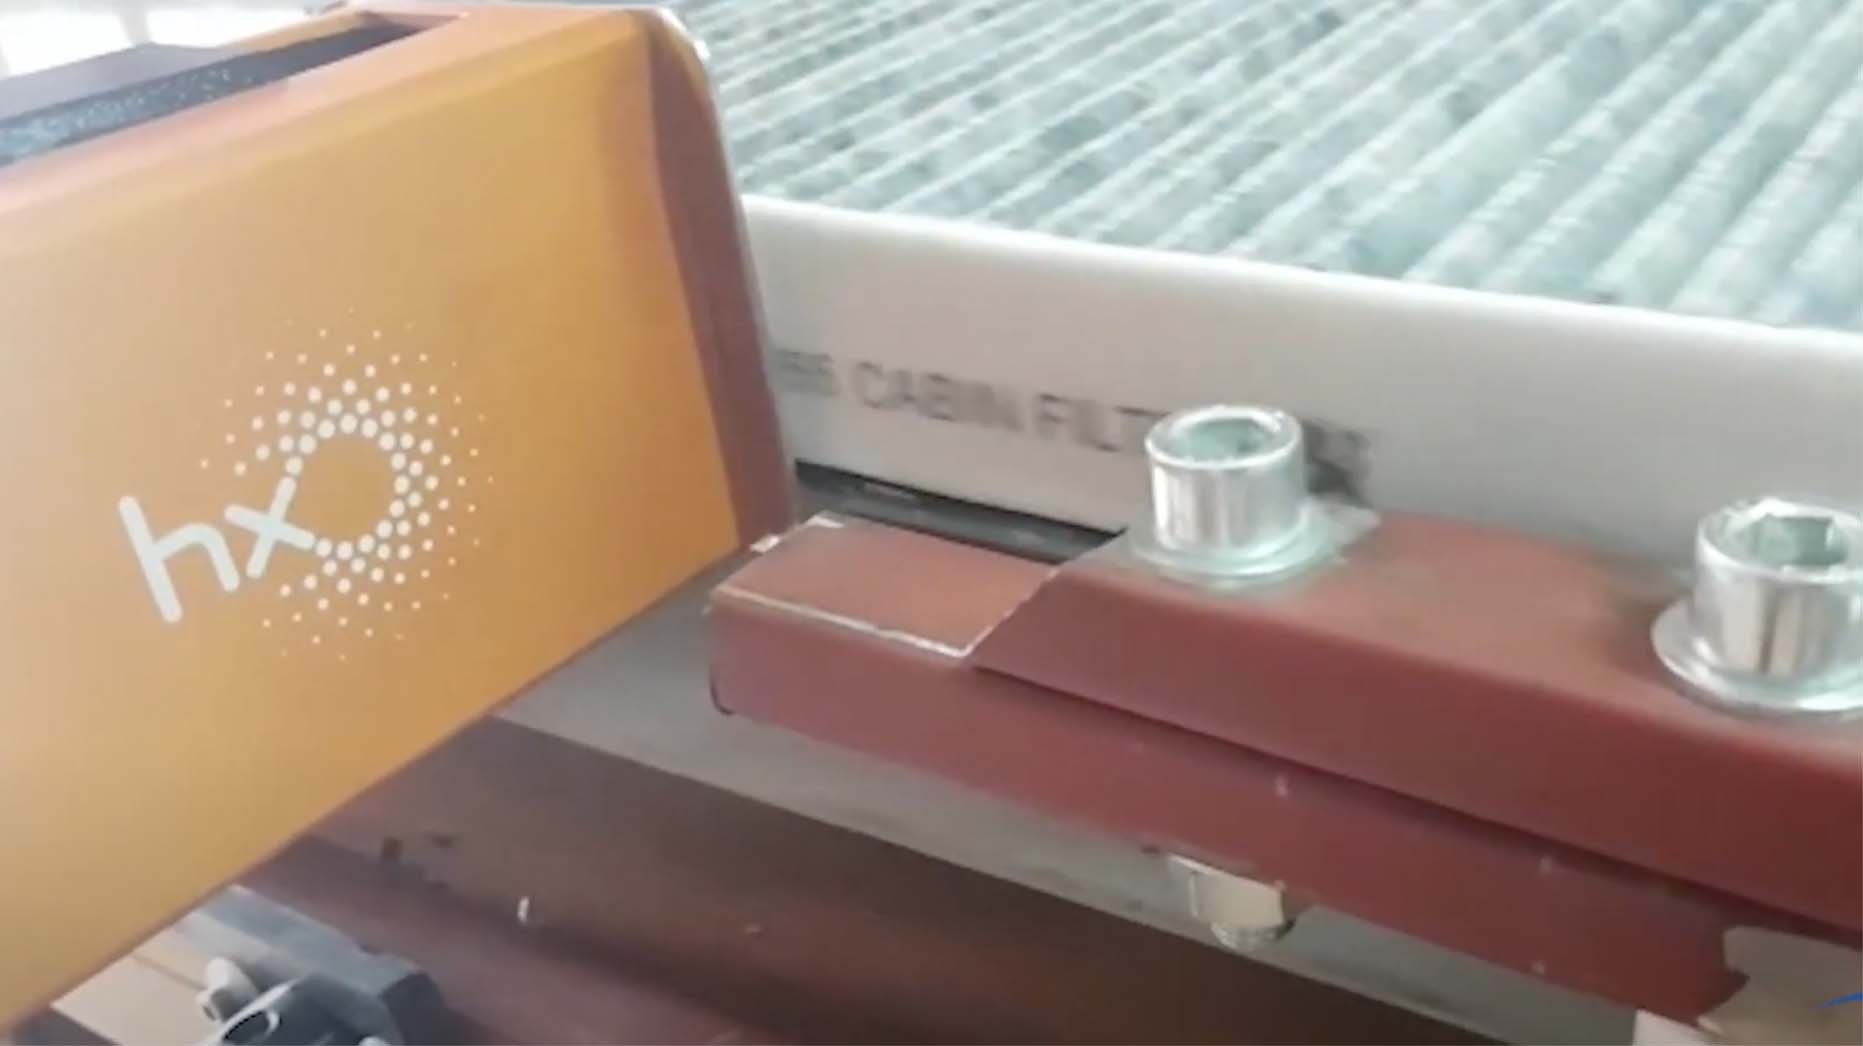 printing on cabin filter building material